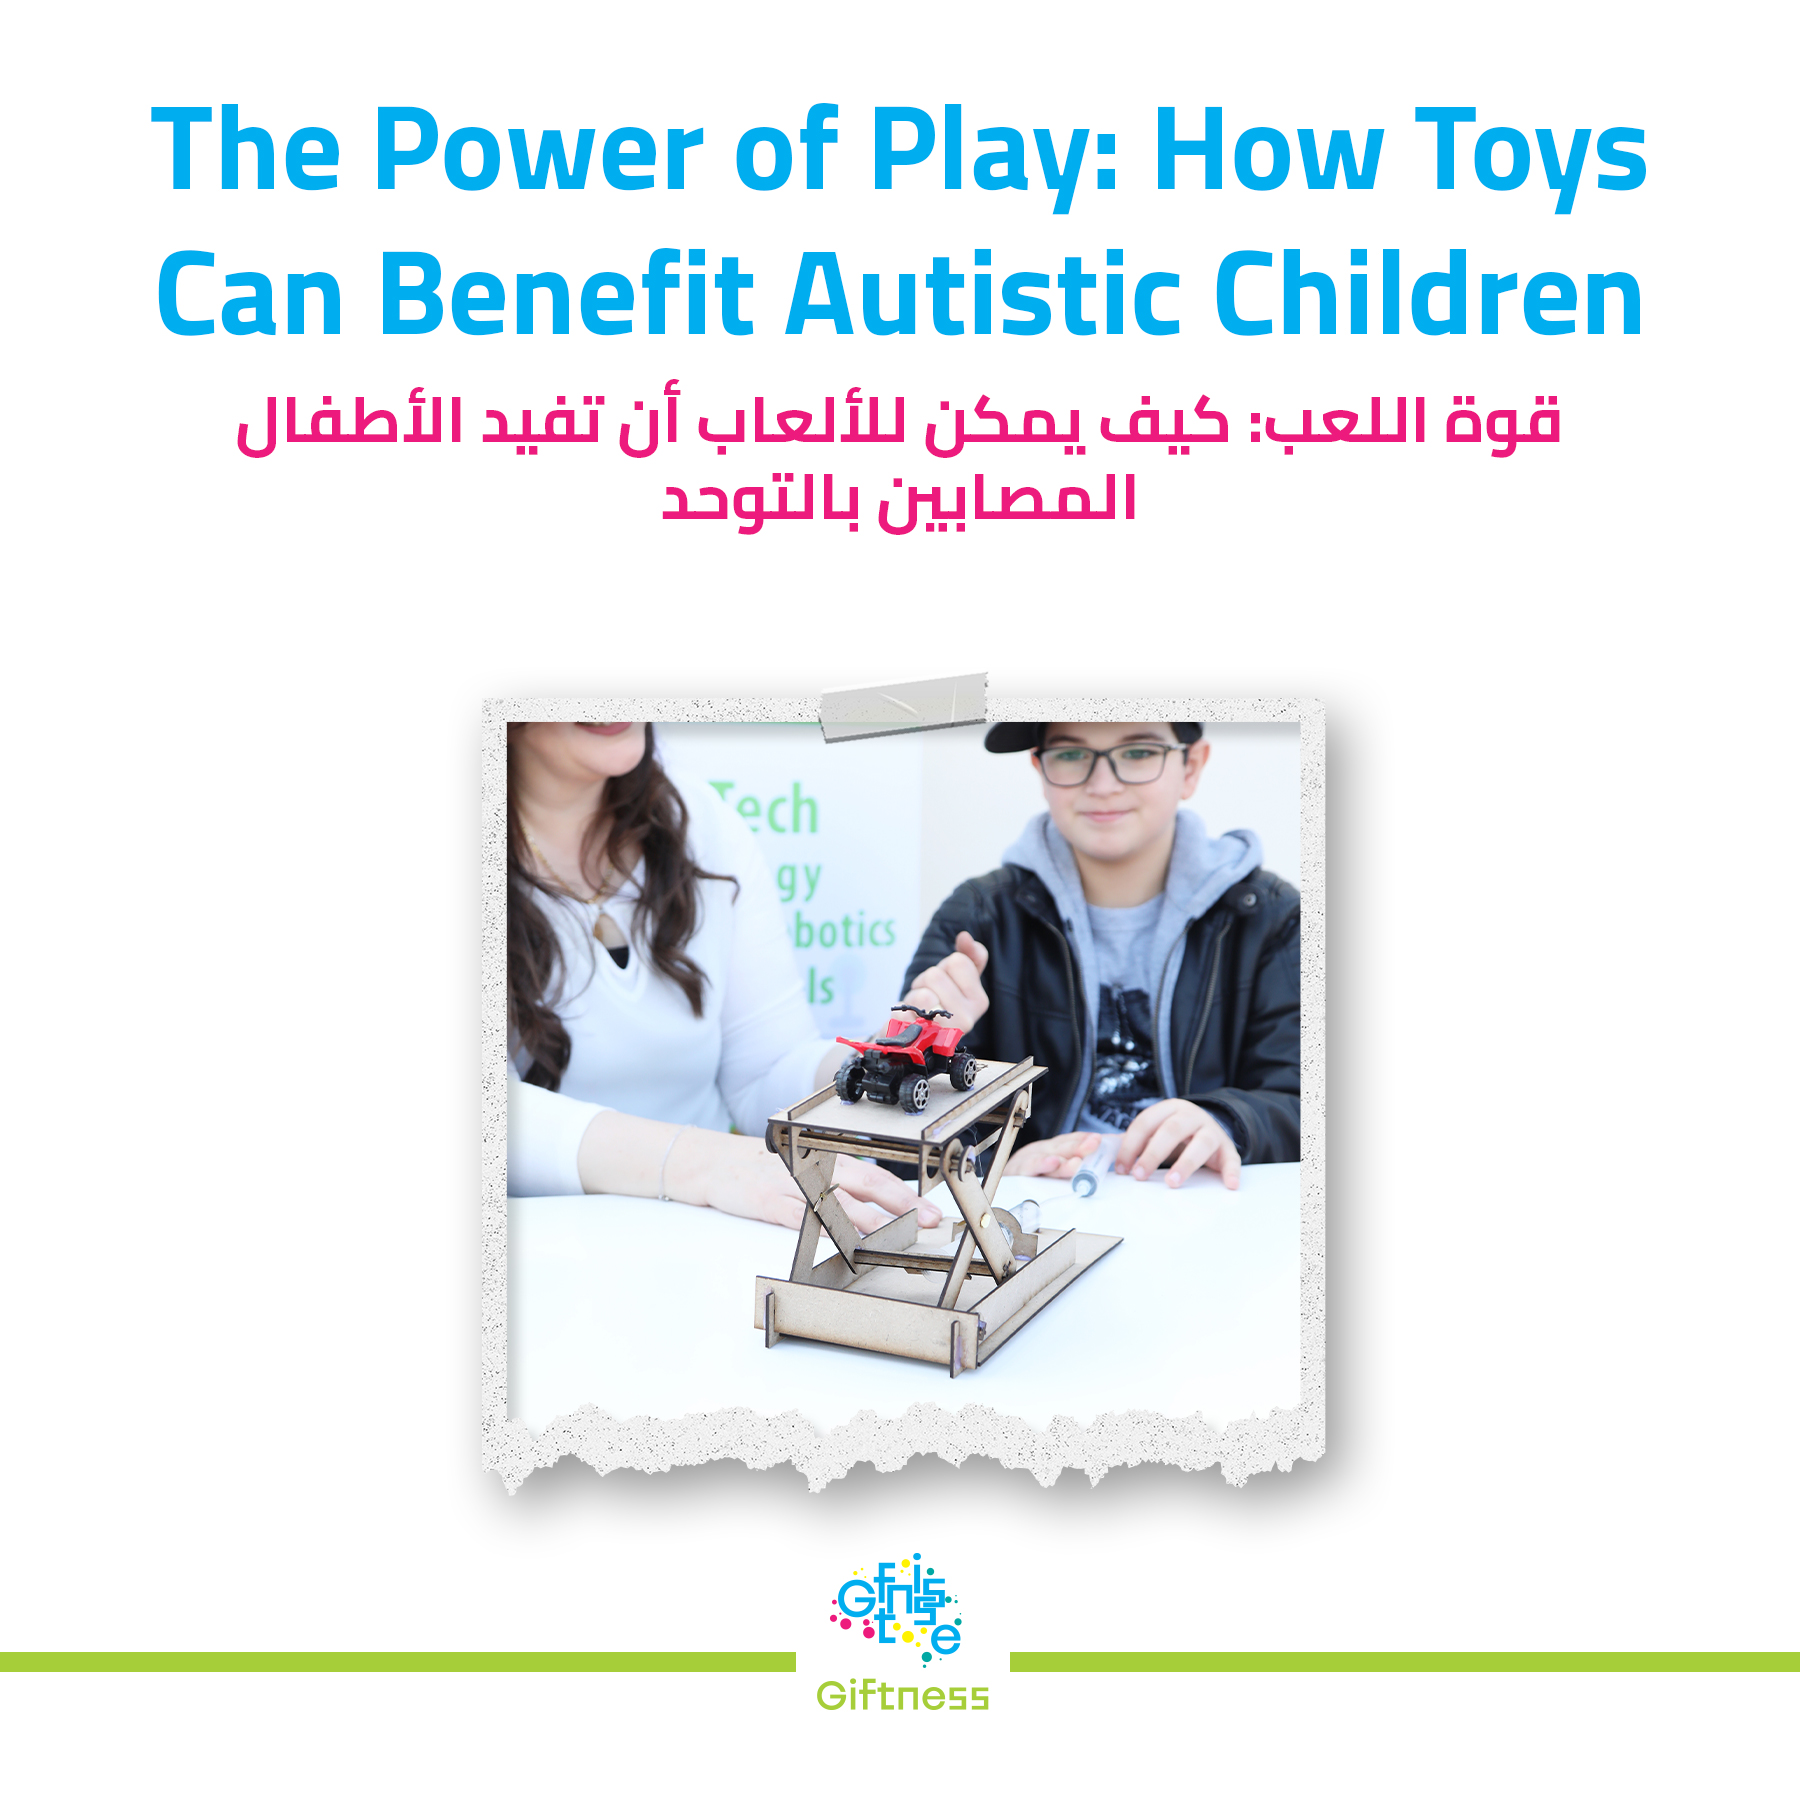 “The Power of Play: How Toys Can Benefit Autistic Children”